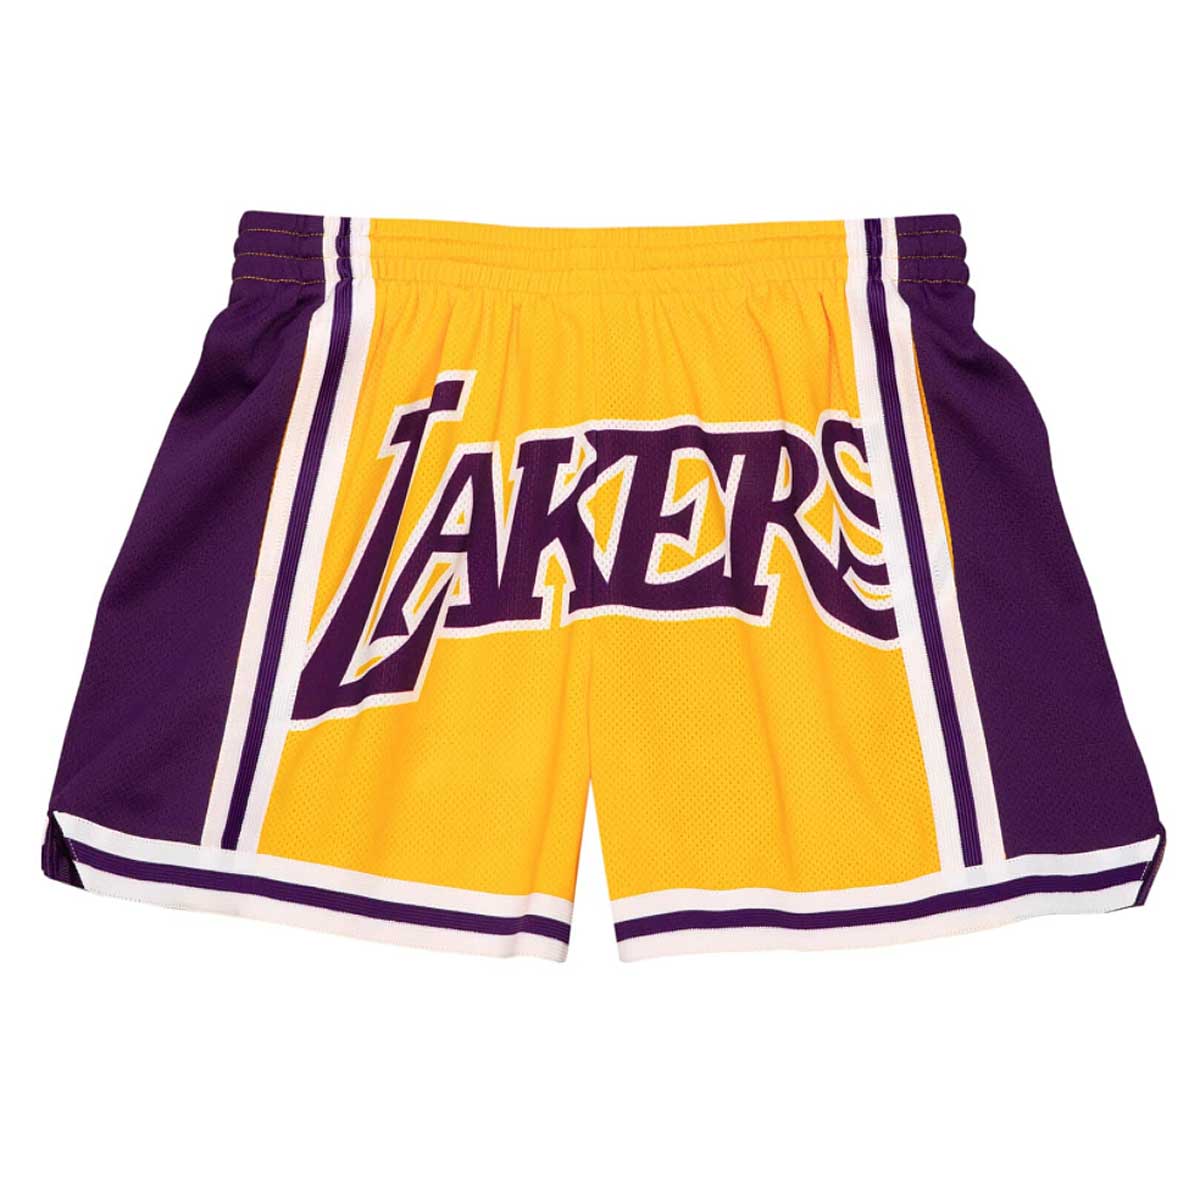 Buy NBA Just Don LA LAKERS SHORT for N/A 0.0 on !